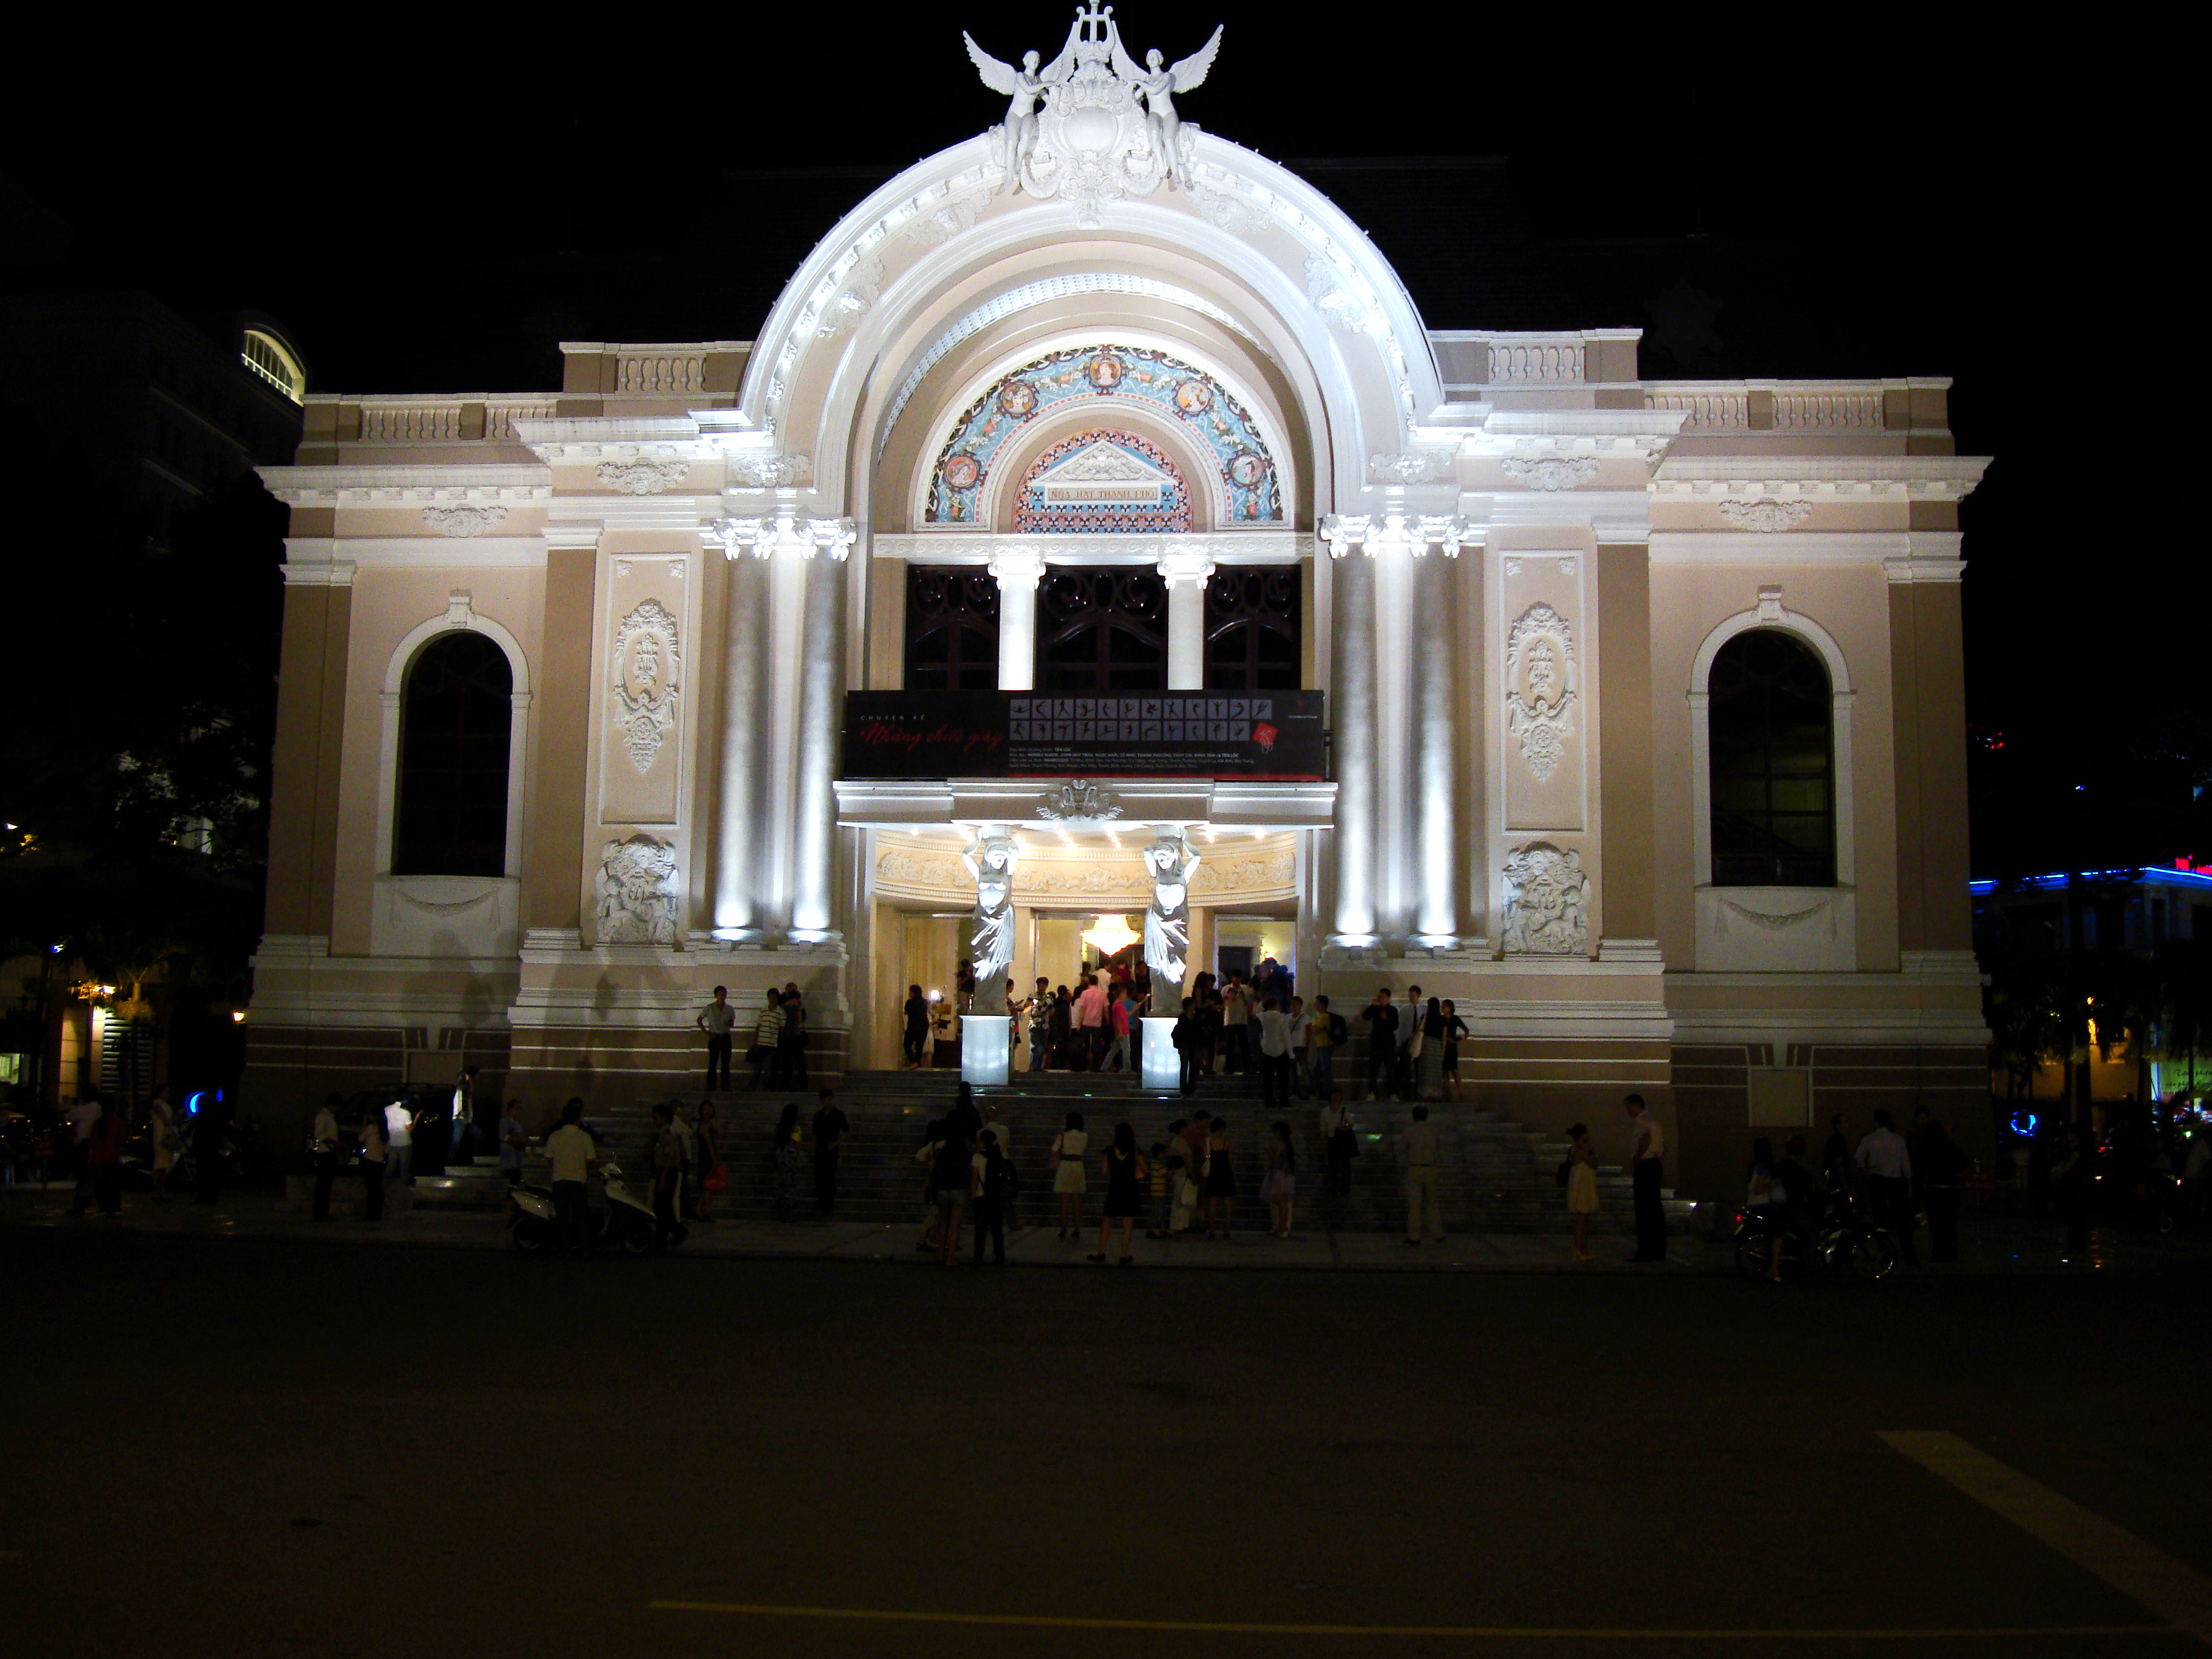 HCMC Opera House French colonial architecture Nov 2009 03